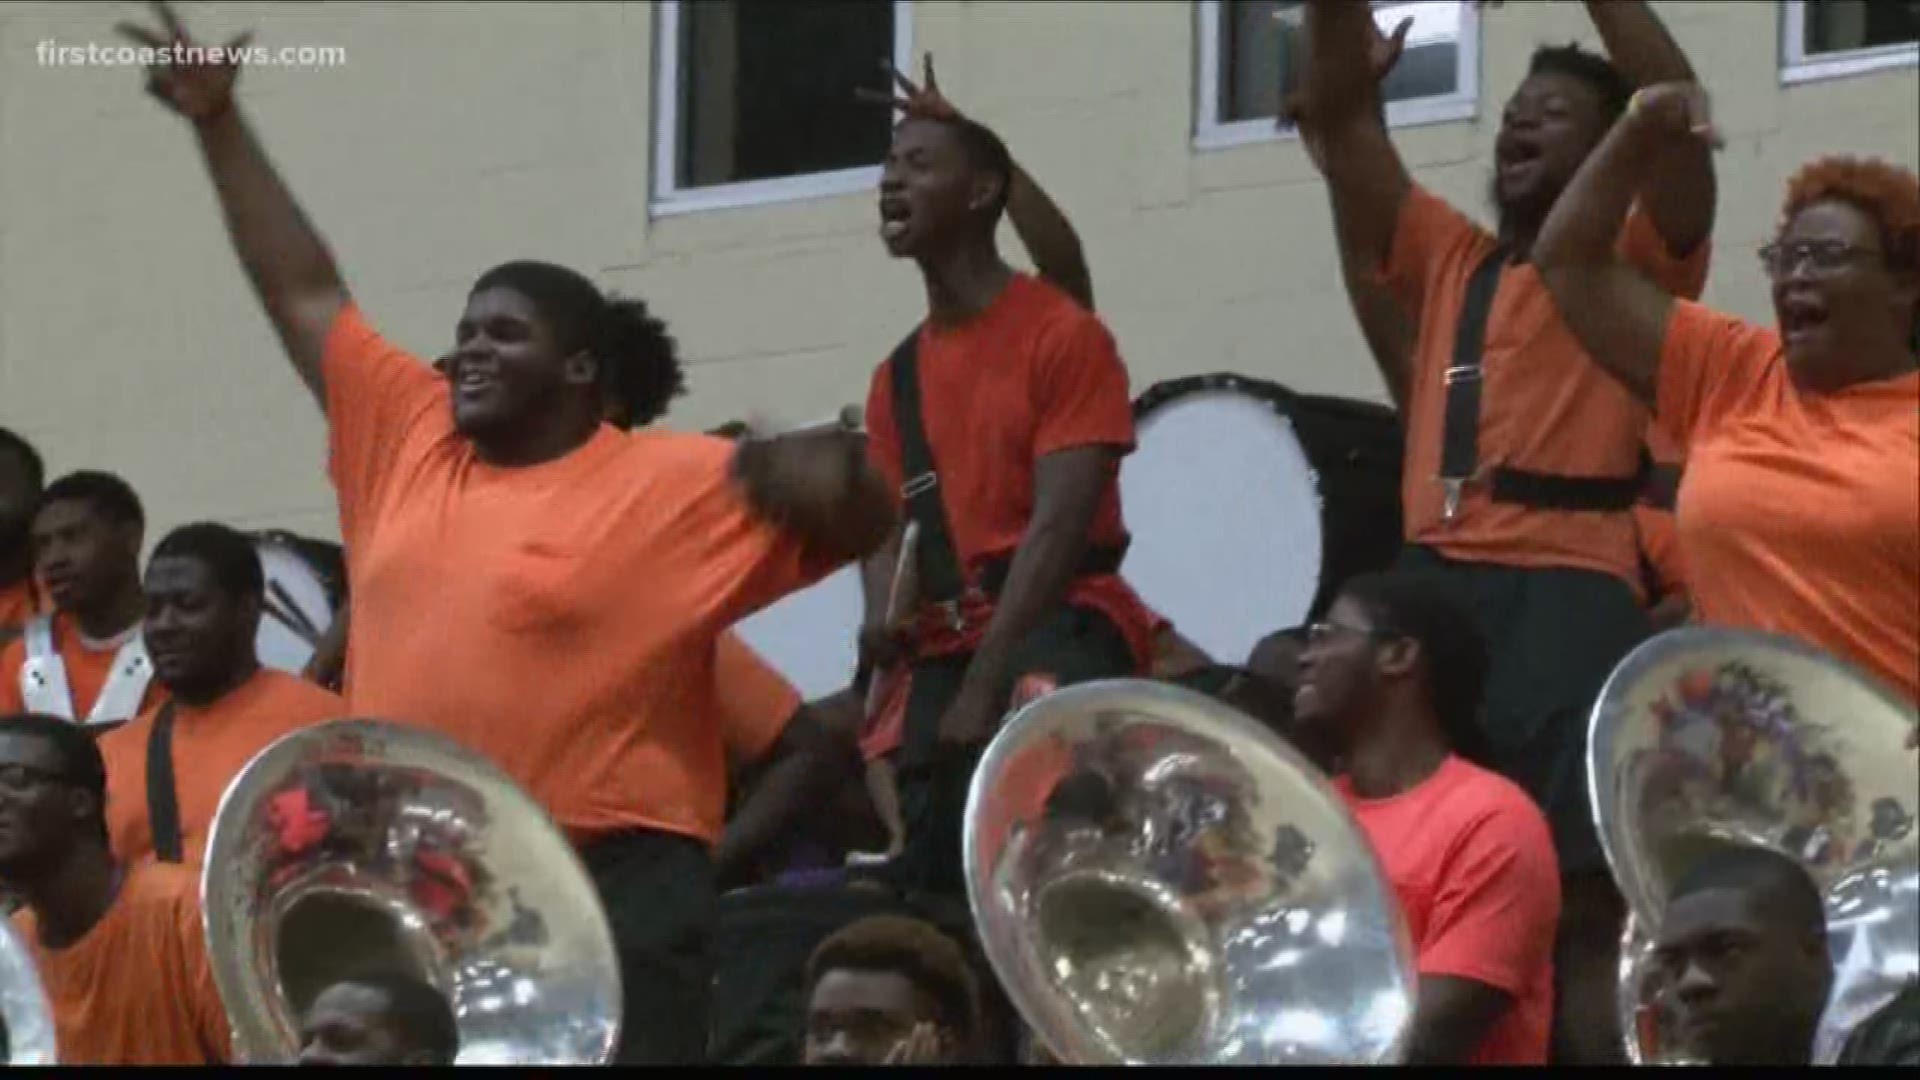 Edward Waters College hosted "Tiger Madness" Monday night, a pep rally to get the student body excited about the 2019-2020 basketball seasons.